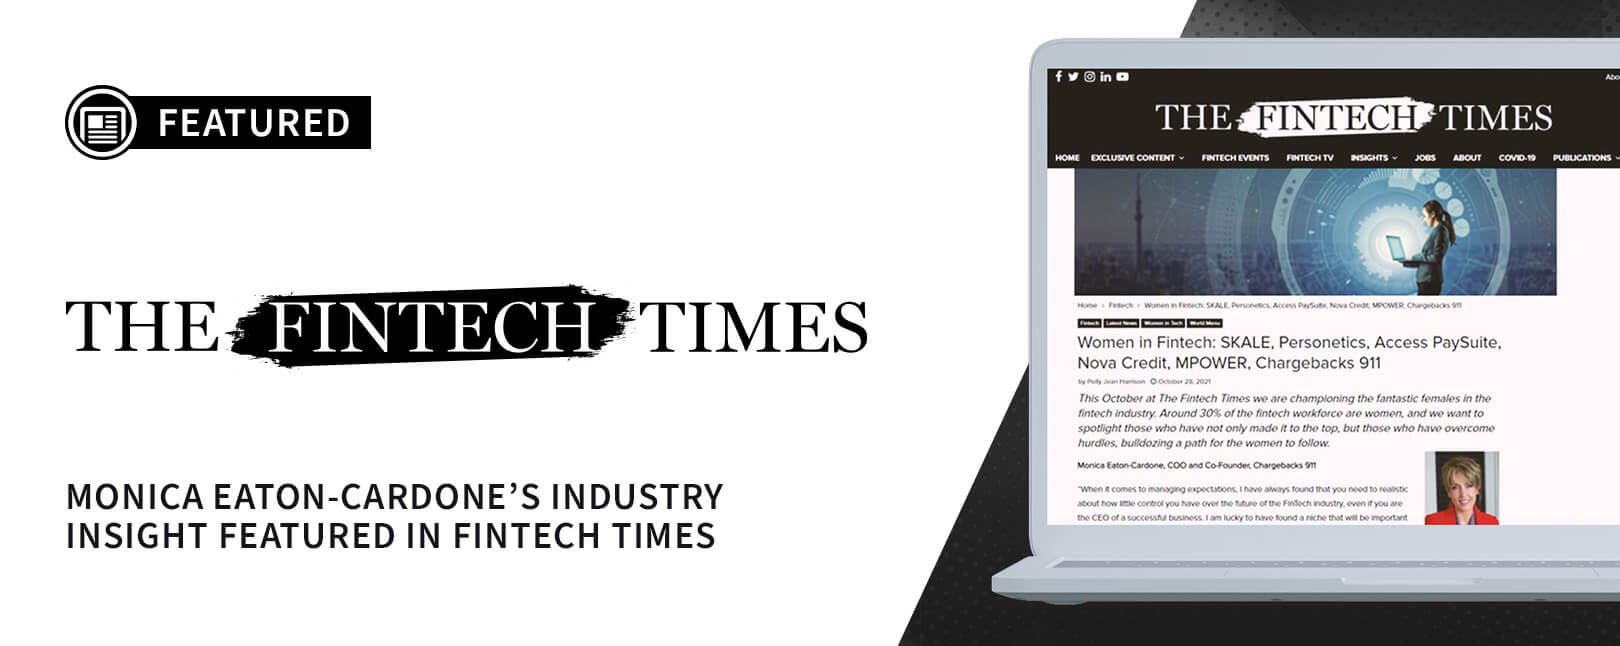 Monica Eaton's Industry Insight Featured in Fintech Times